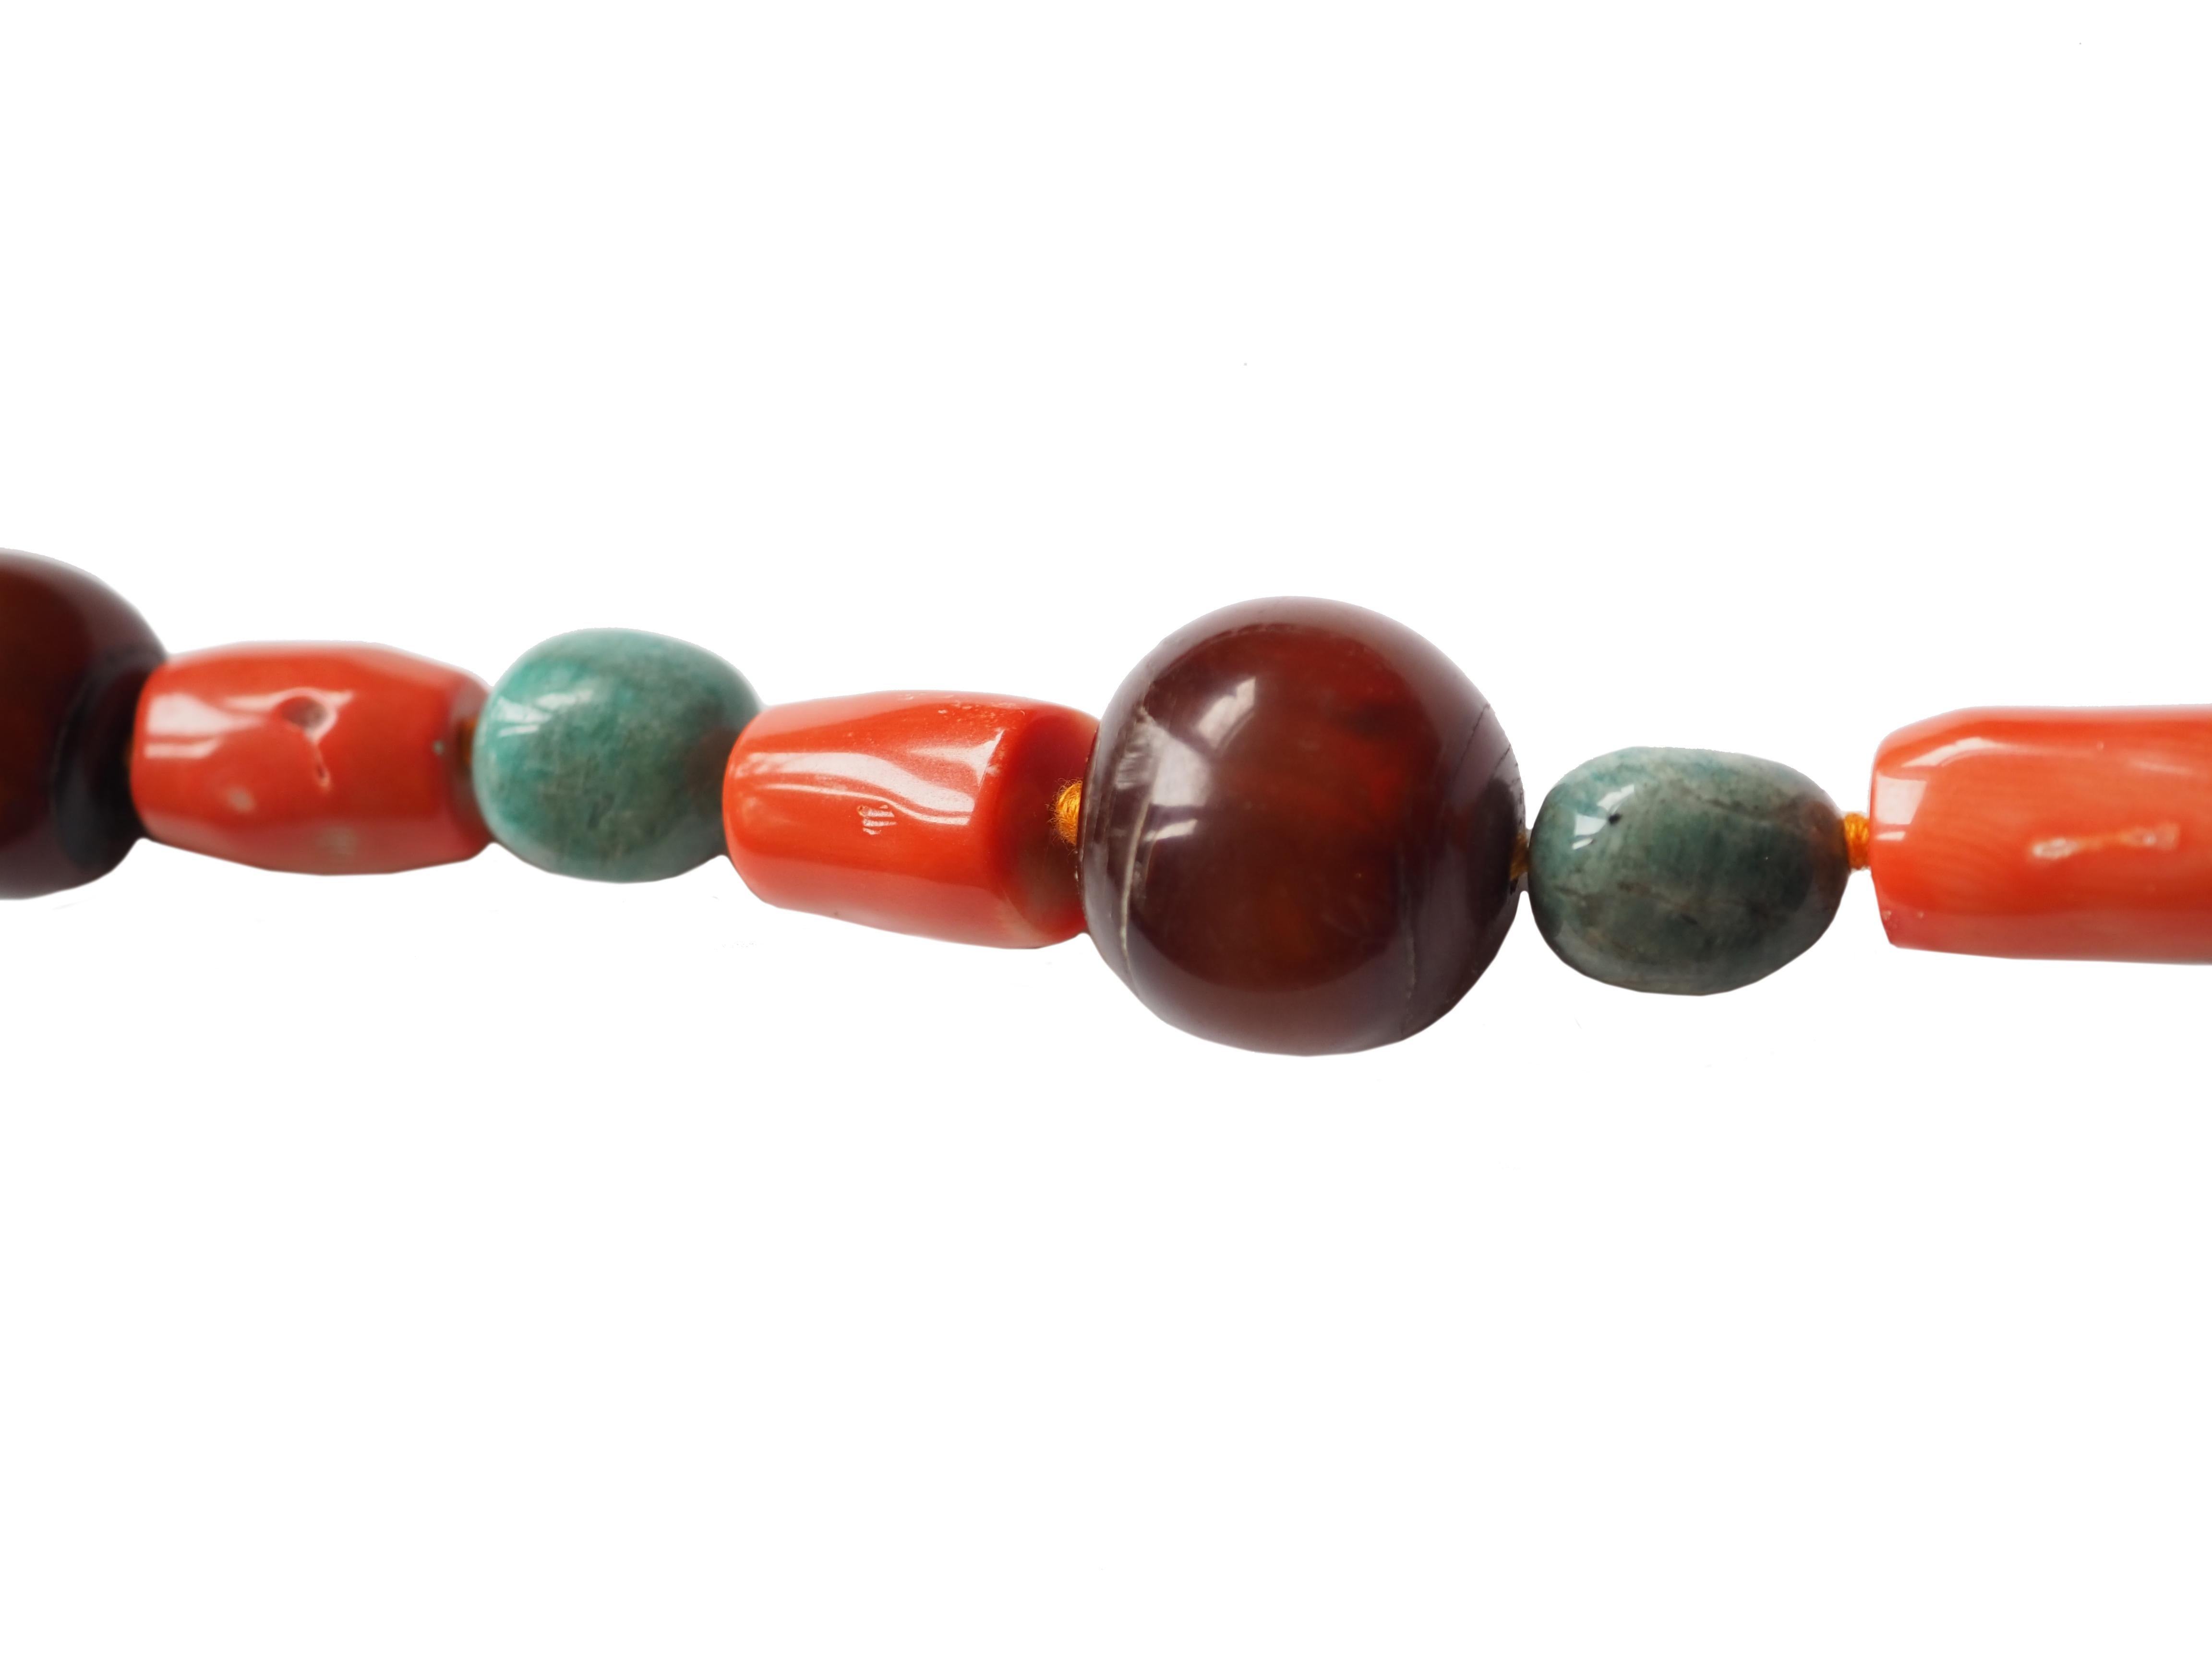 Long necklace  Coral Amazonite Desert Amber 80 cm
All Giulia Colussi jewelry is new and has never been previously owned or worn. Each item will arrive at your door beautifully gift wrapped in our boxes, put inside an elegant pouch or jewel box.
